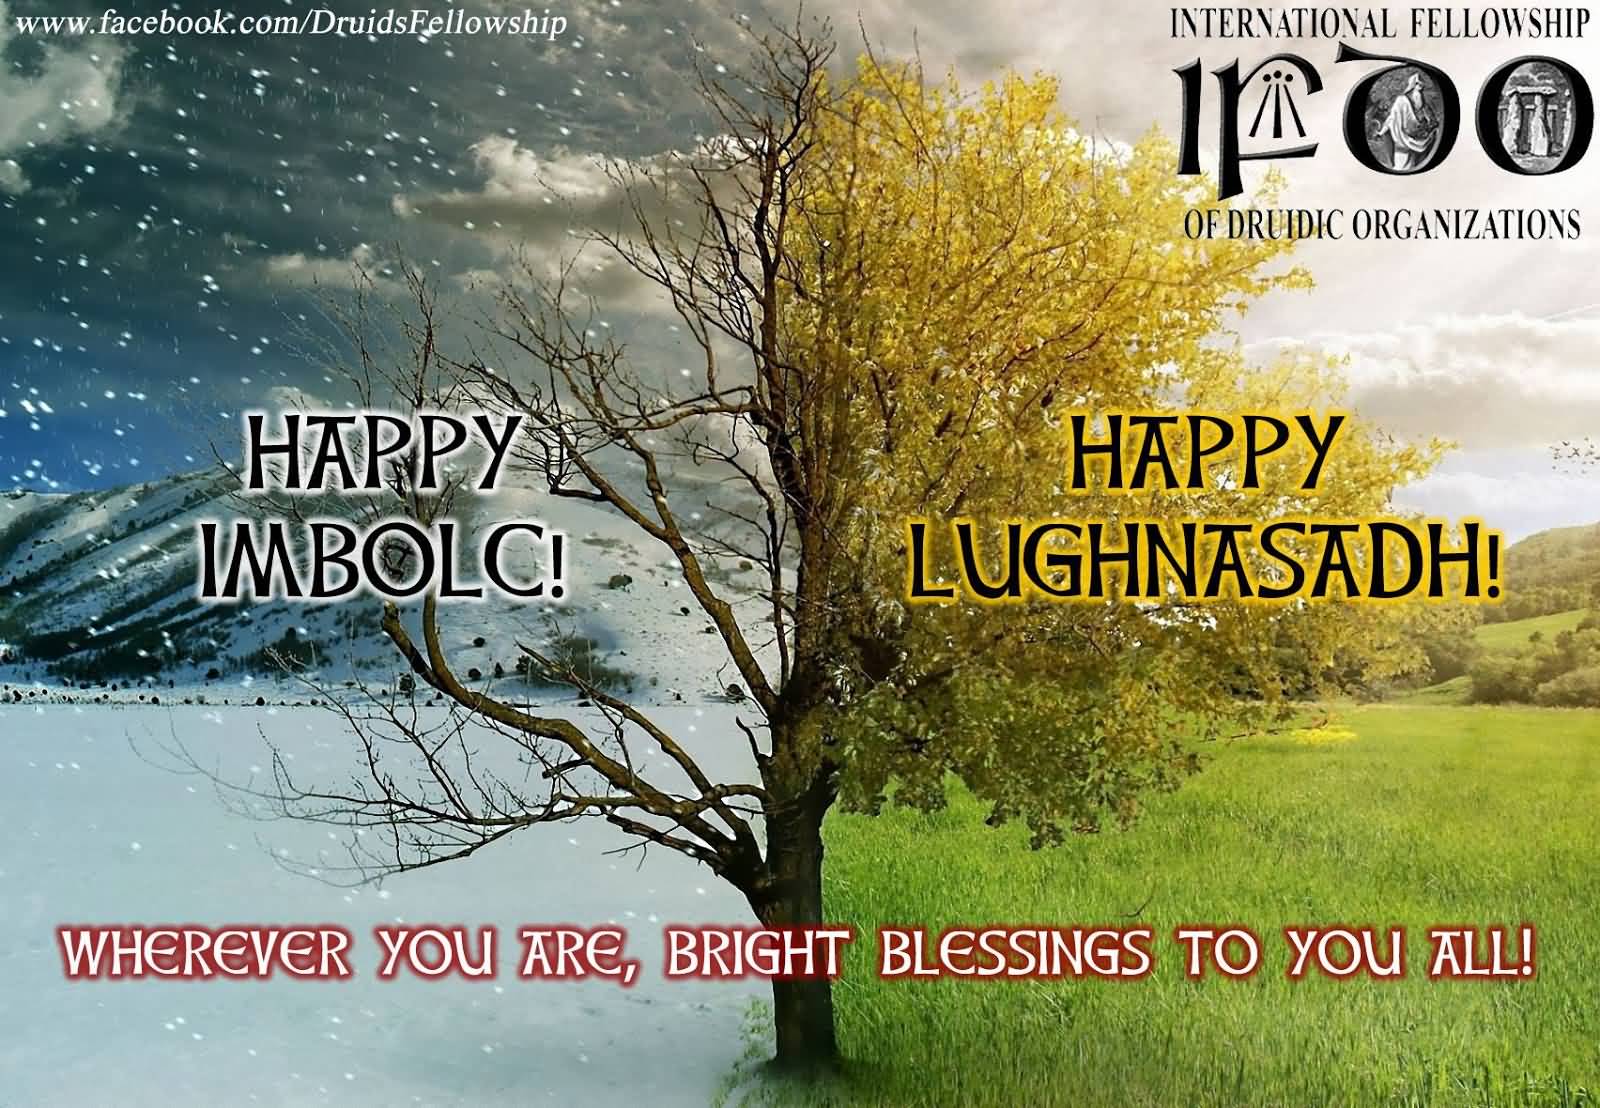 Happy Imbolc Happy Lughnasagh Wherever You Are Bright Blessings To You All